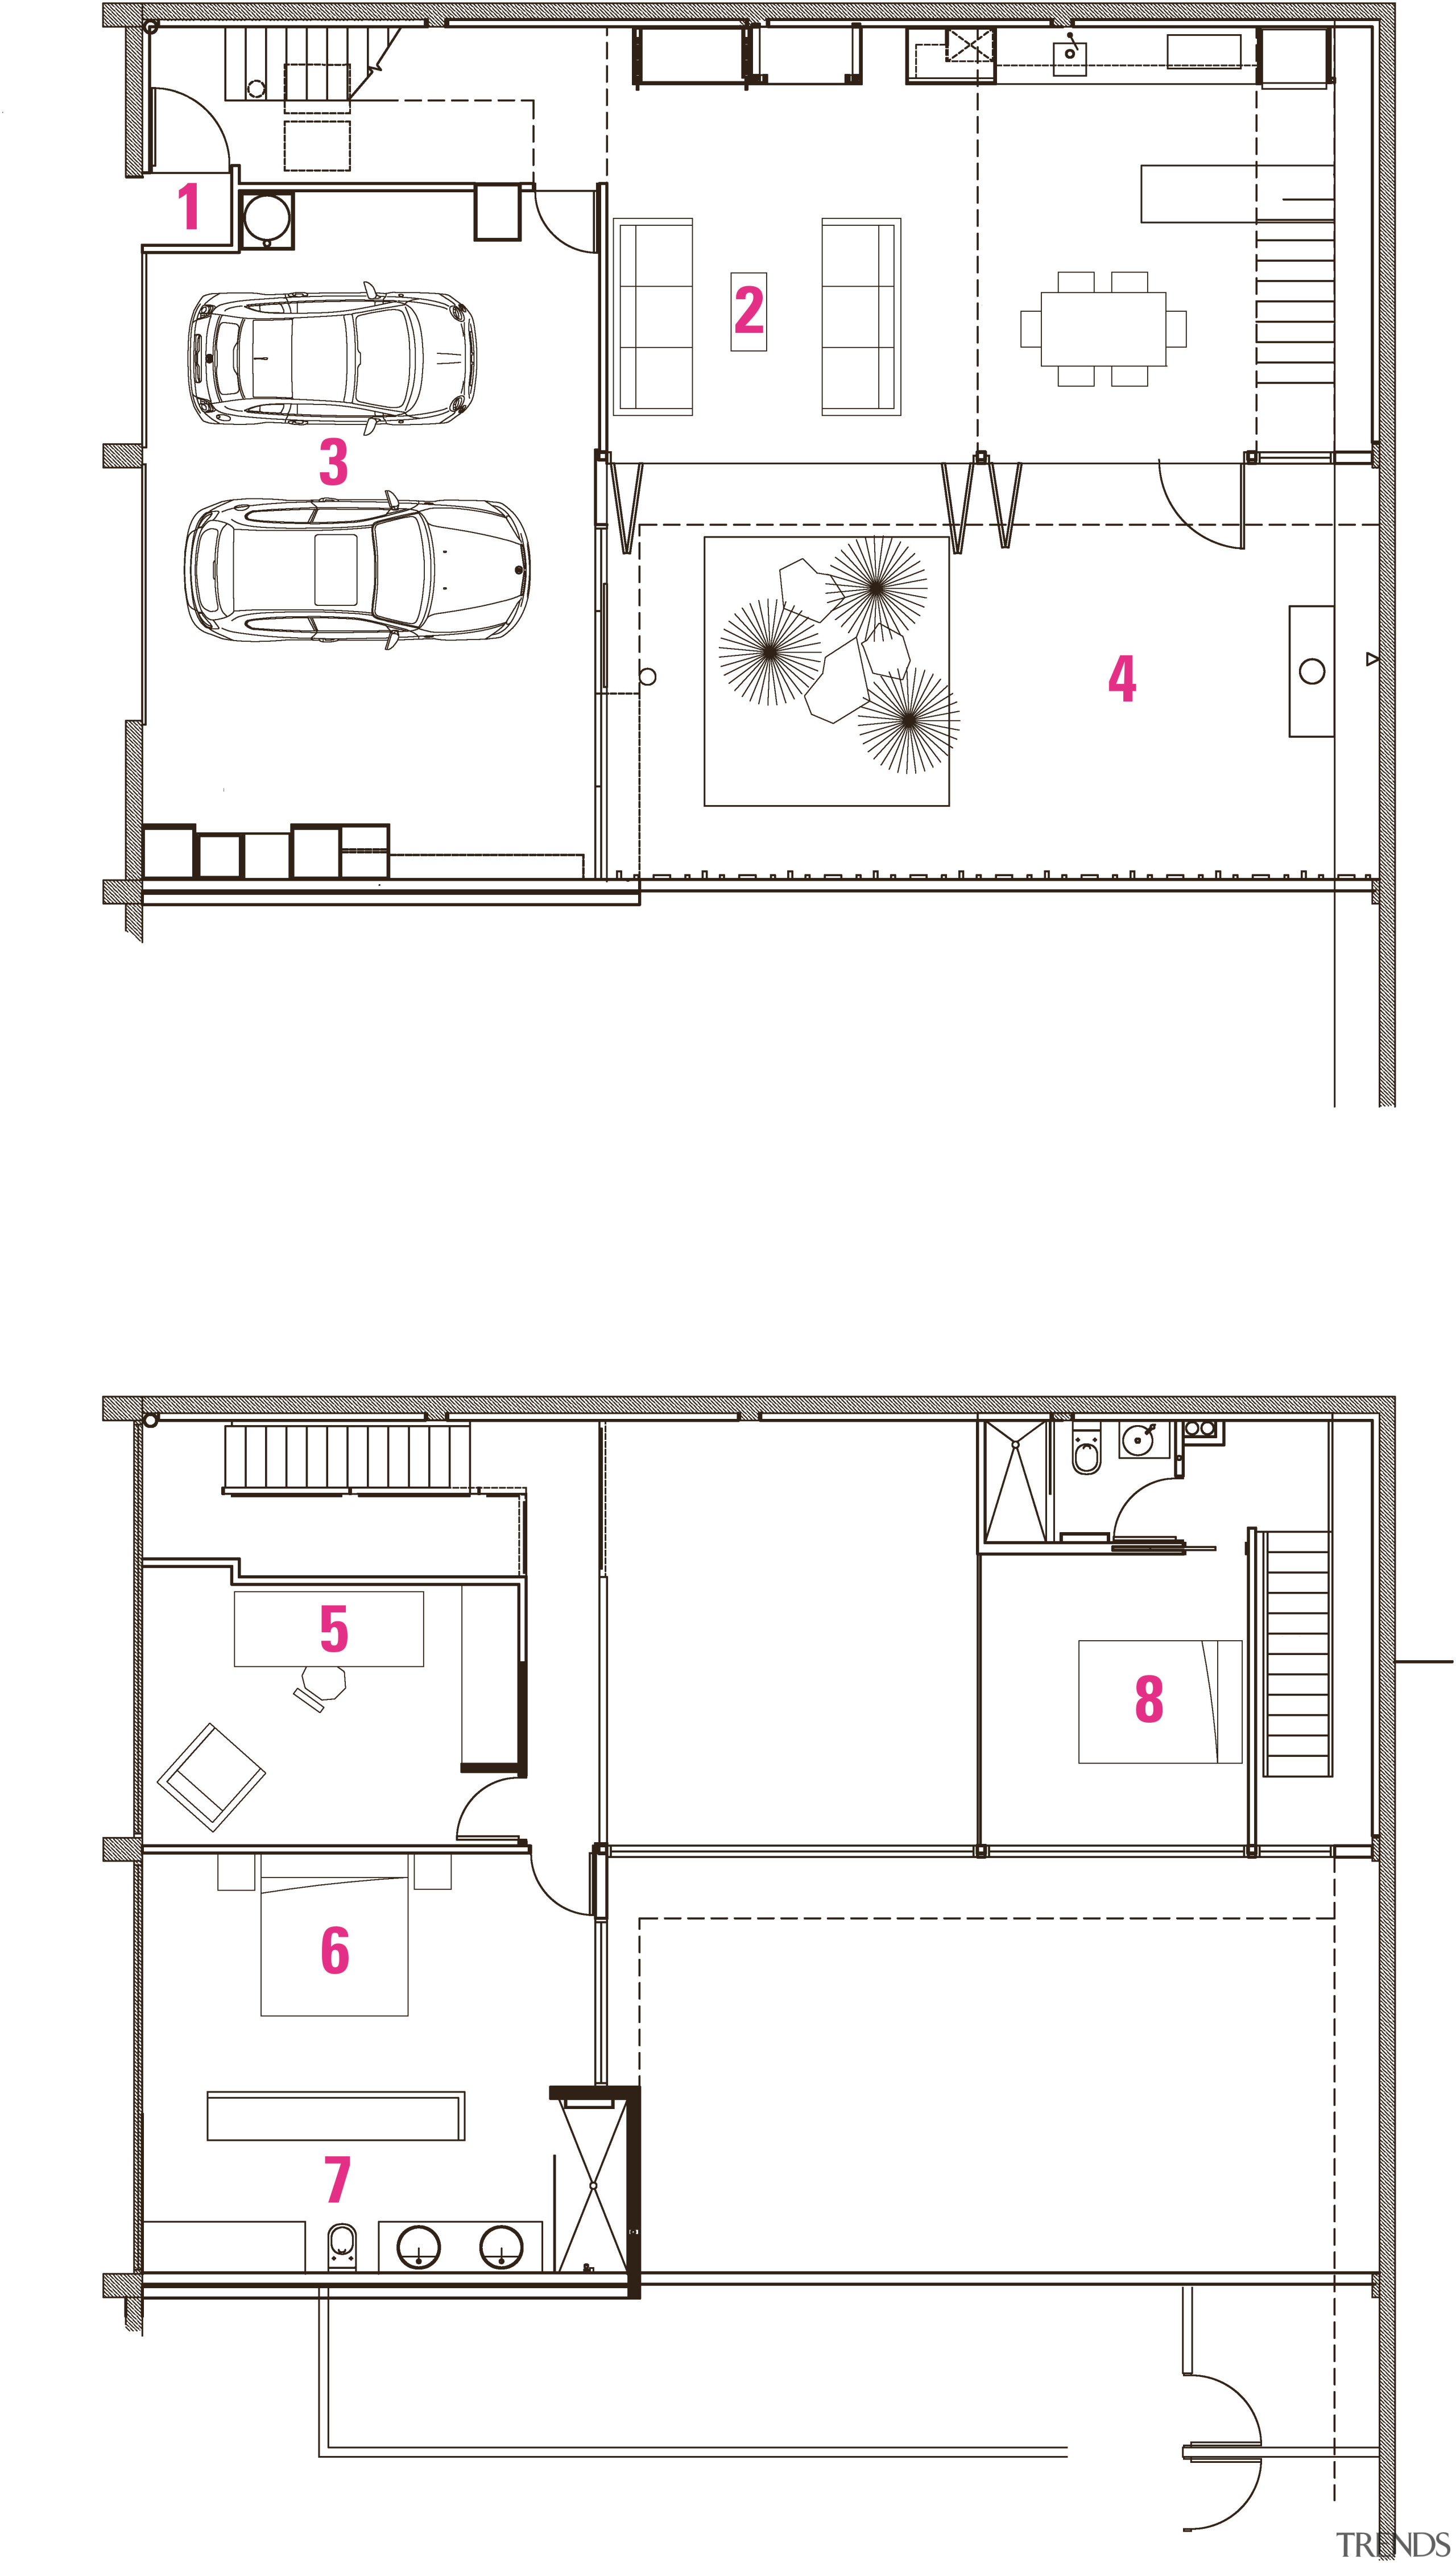 Floor plans to commercial building residential conversion area, design, diagram, drawing, floor plan, line, product, product design, text, white